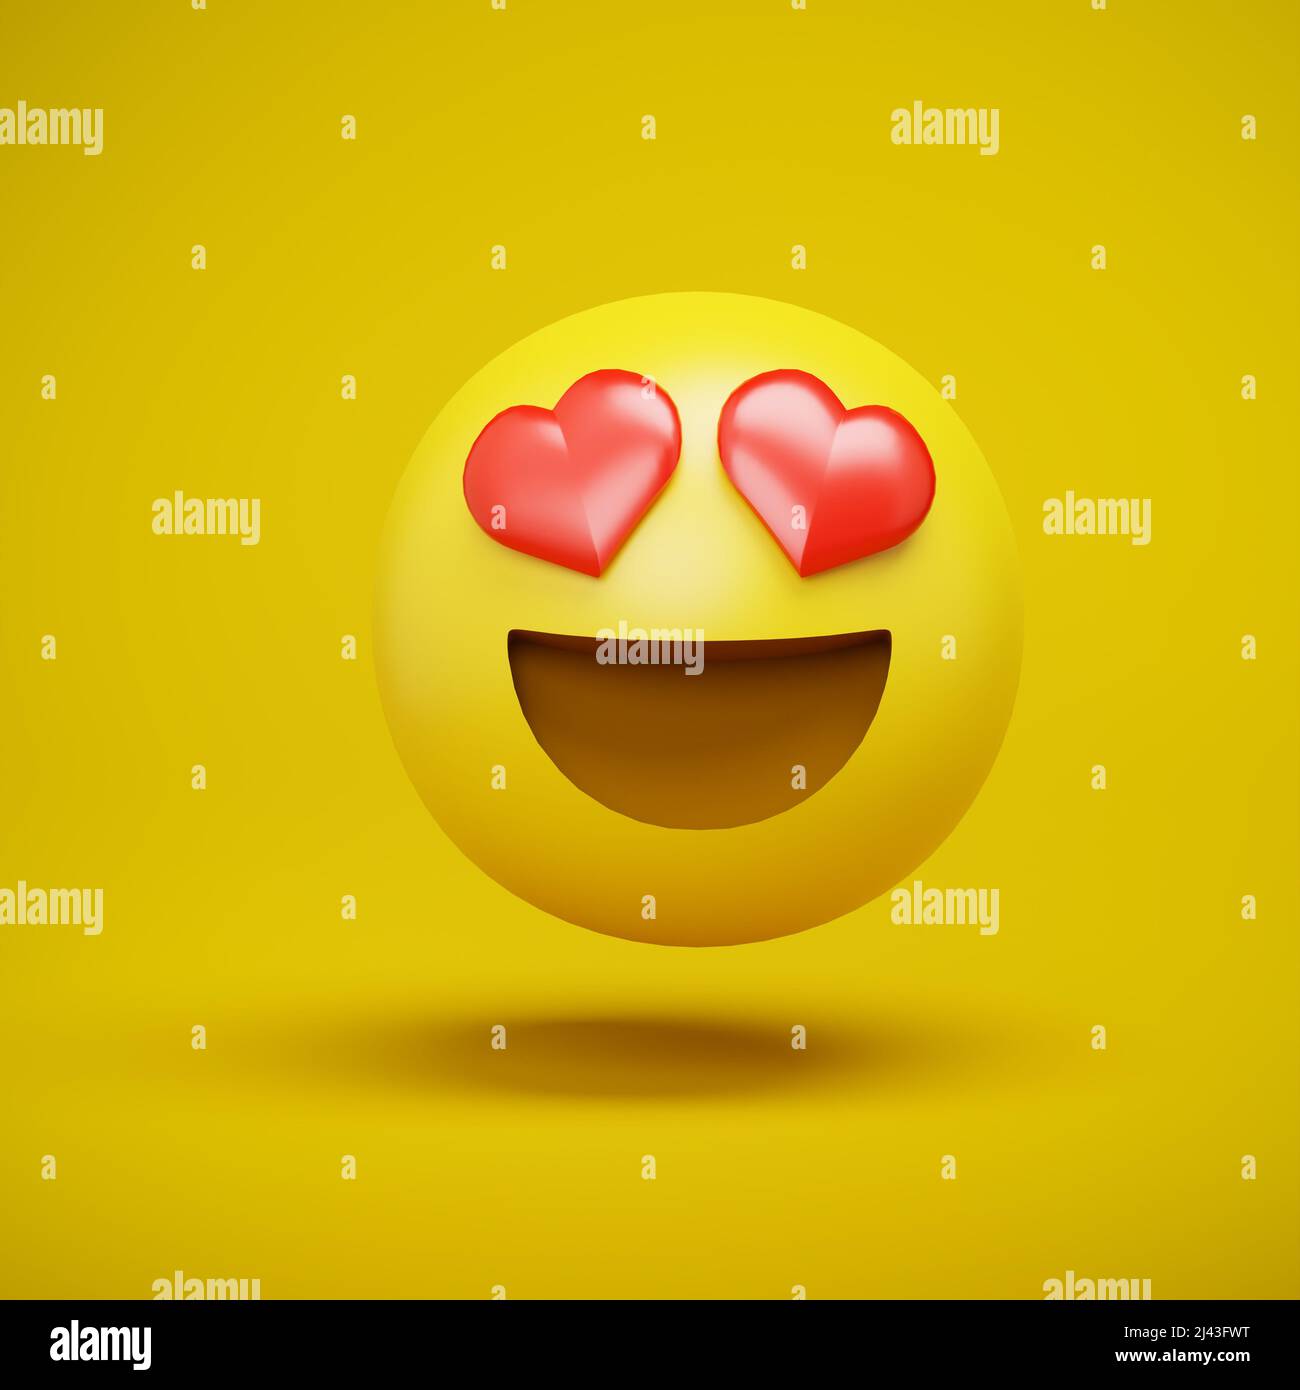 3d render of an emoji smiley with red hearts as eyes. Heart eyes - heart face. Love concept Stock Photo